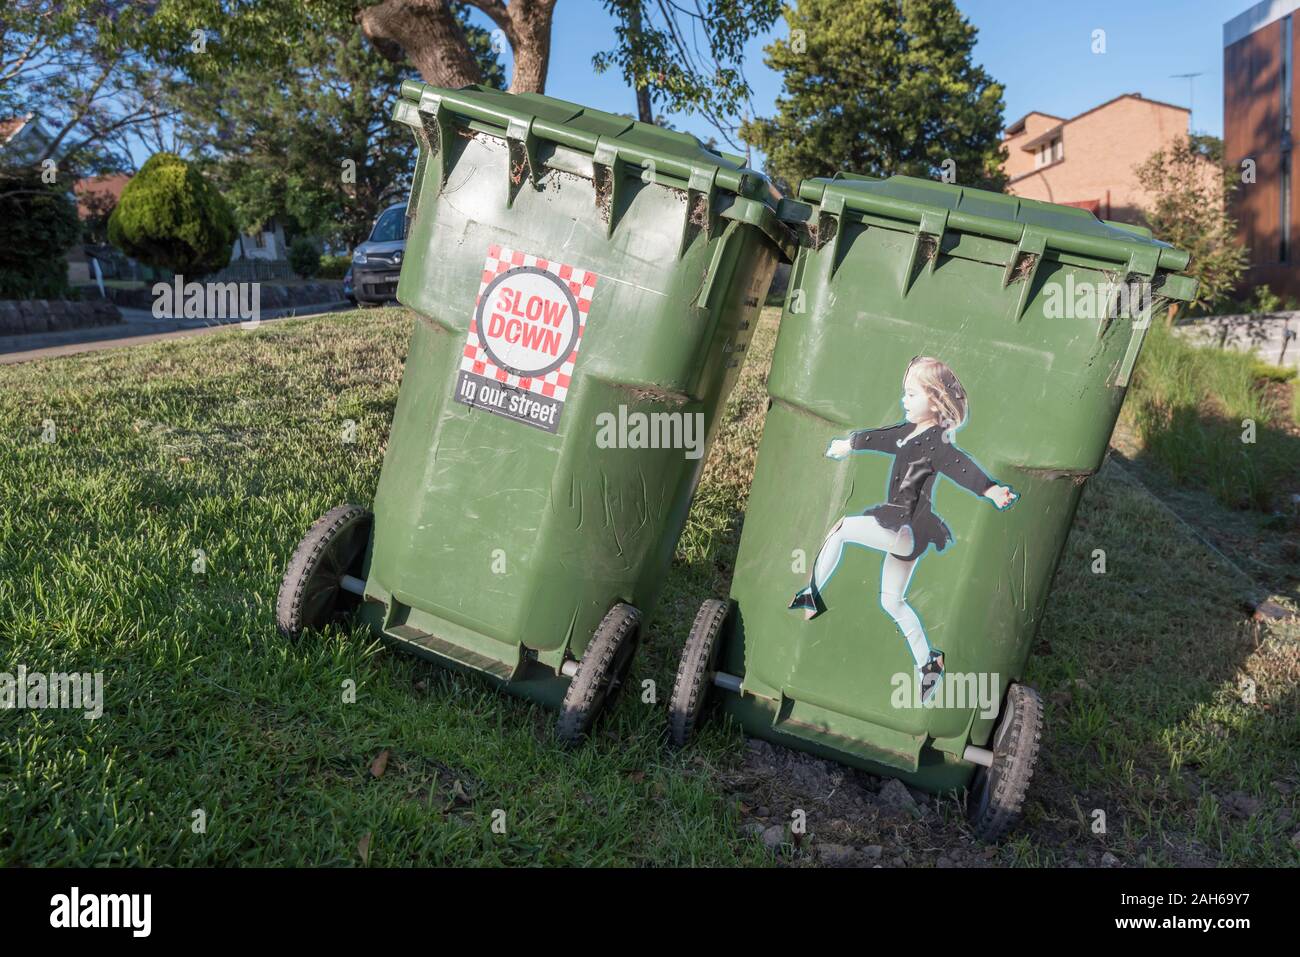 Two large 240L green waste bins with road safety concept stickers or decals attached sit on a roadside footpath facing the morning sun in Sydney, Aust Stock Photo